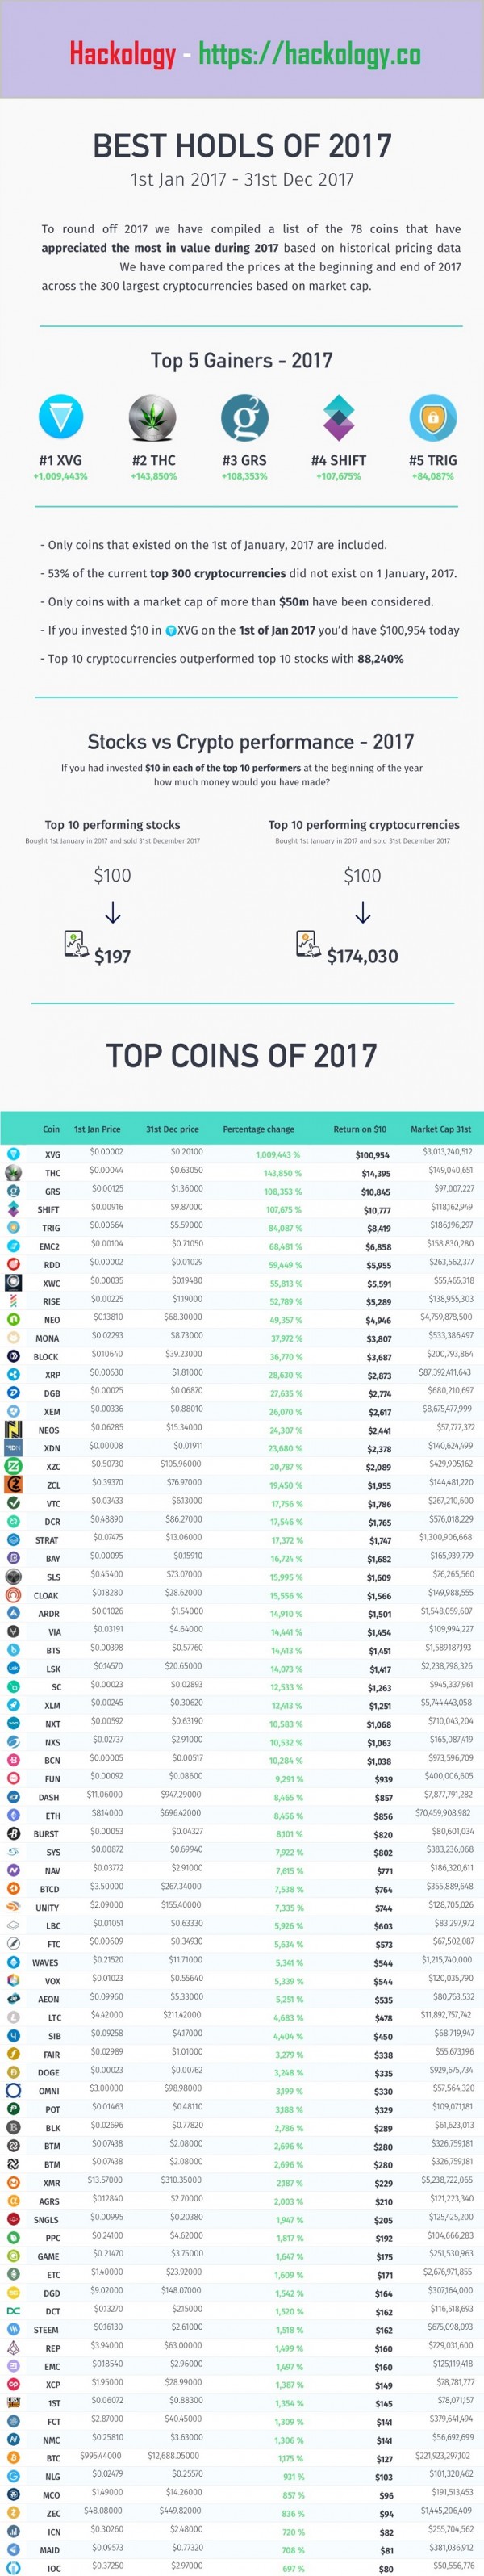 Best Cryptocurrency of 2017